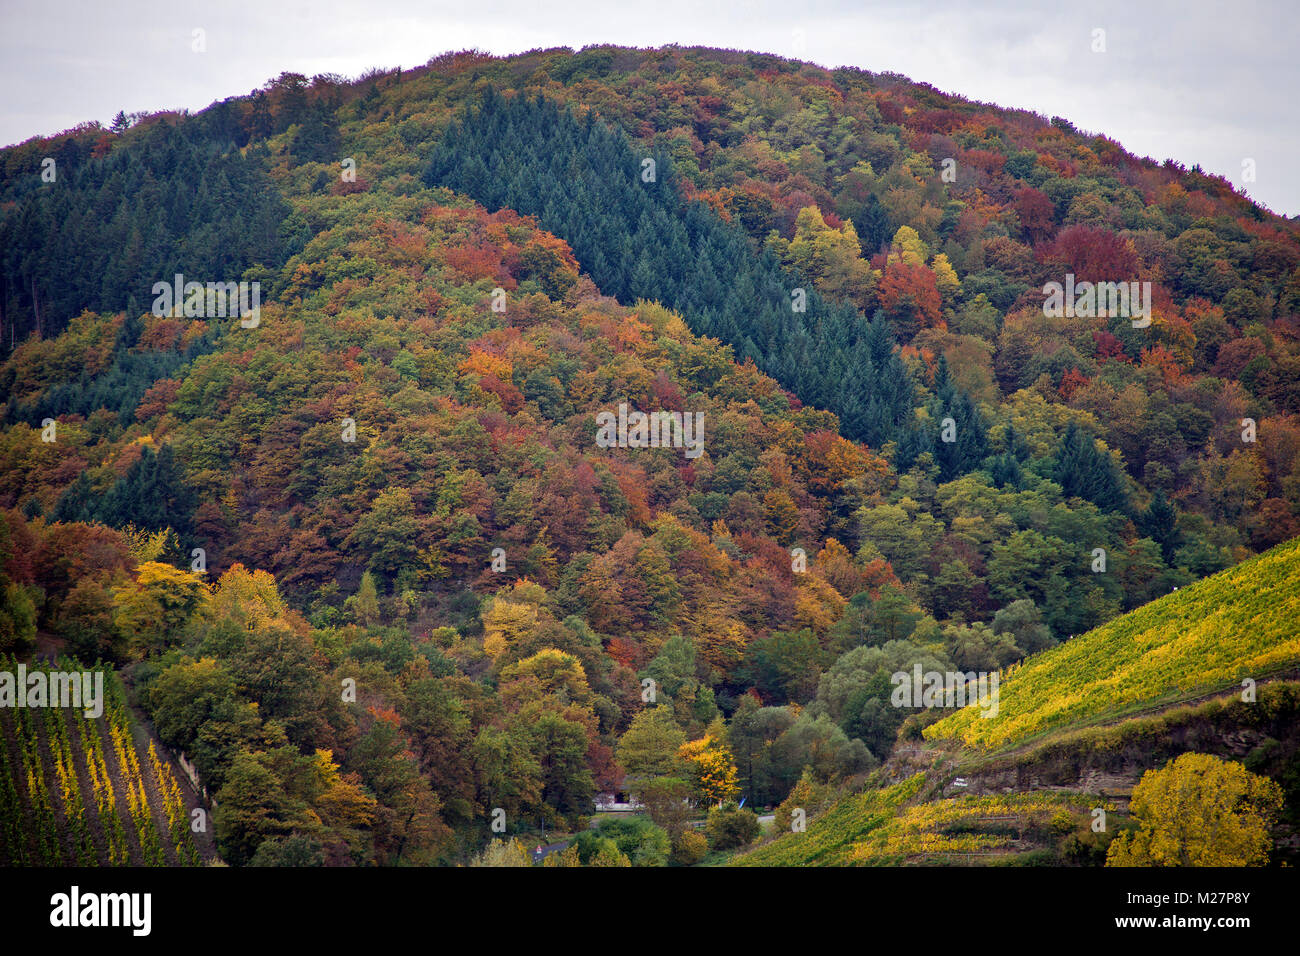 Autumn colours, mixed forest at fall, Neumagen-Dhron, Moselle river, Rhineland-Palatinate, Germany, Europe Stock Photo